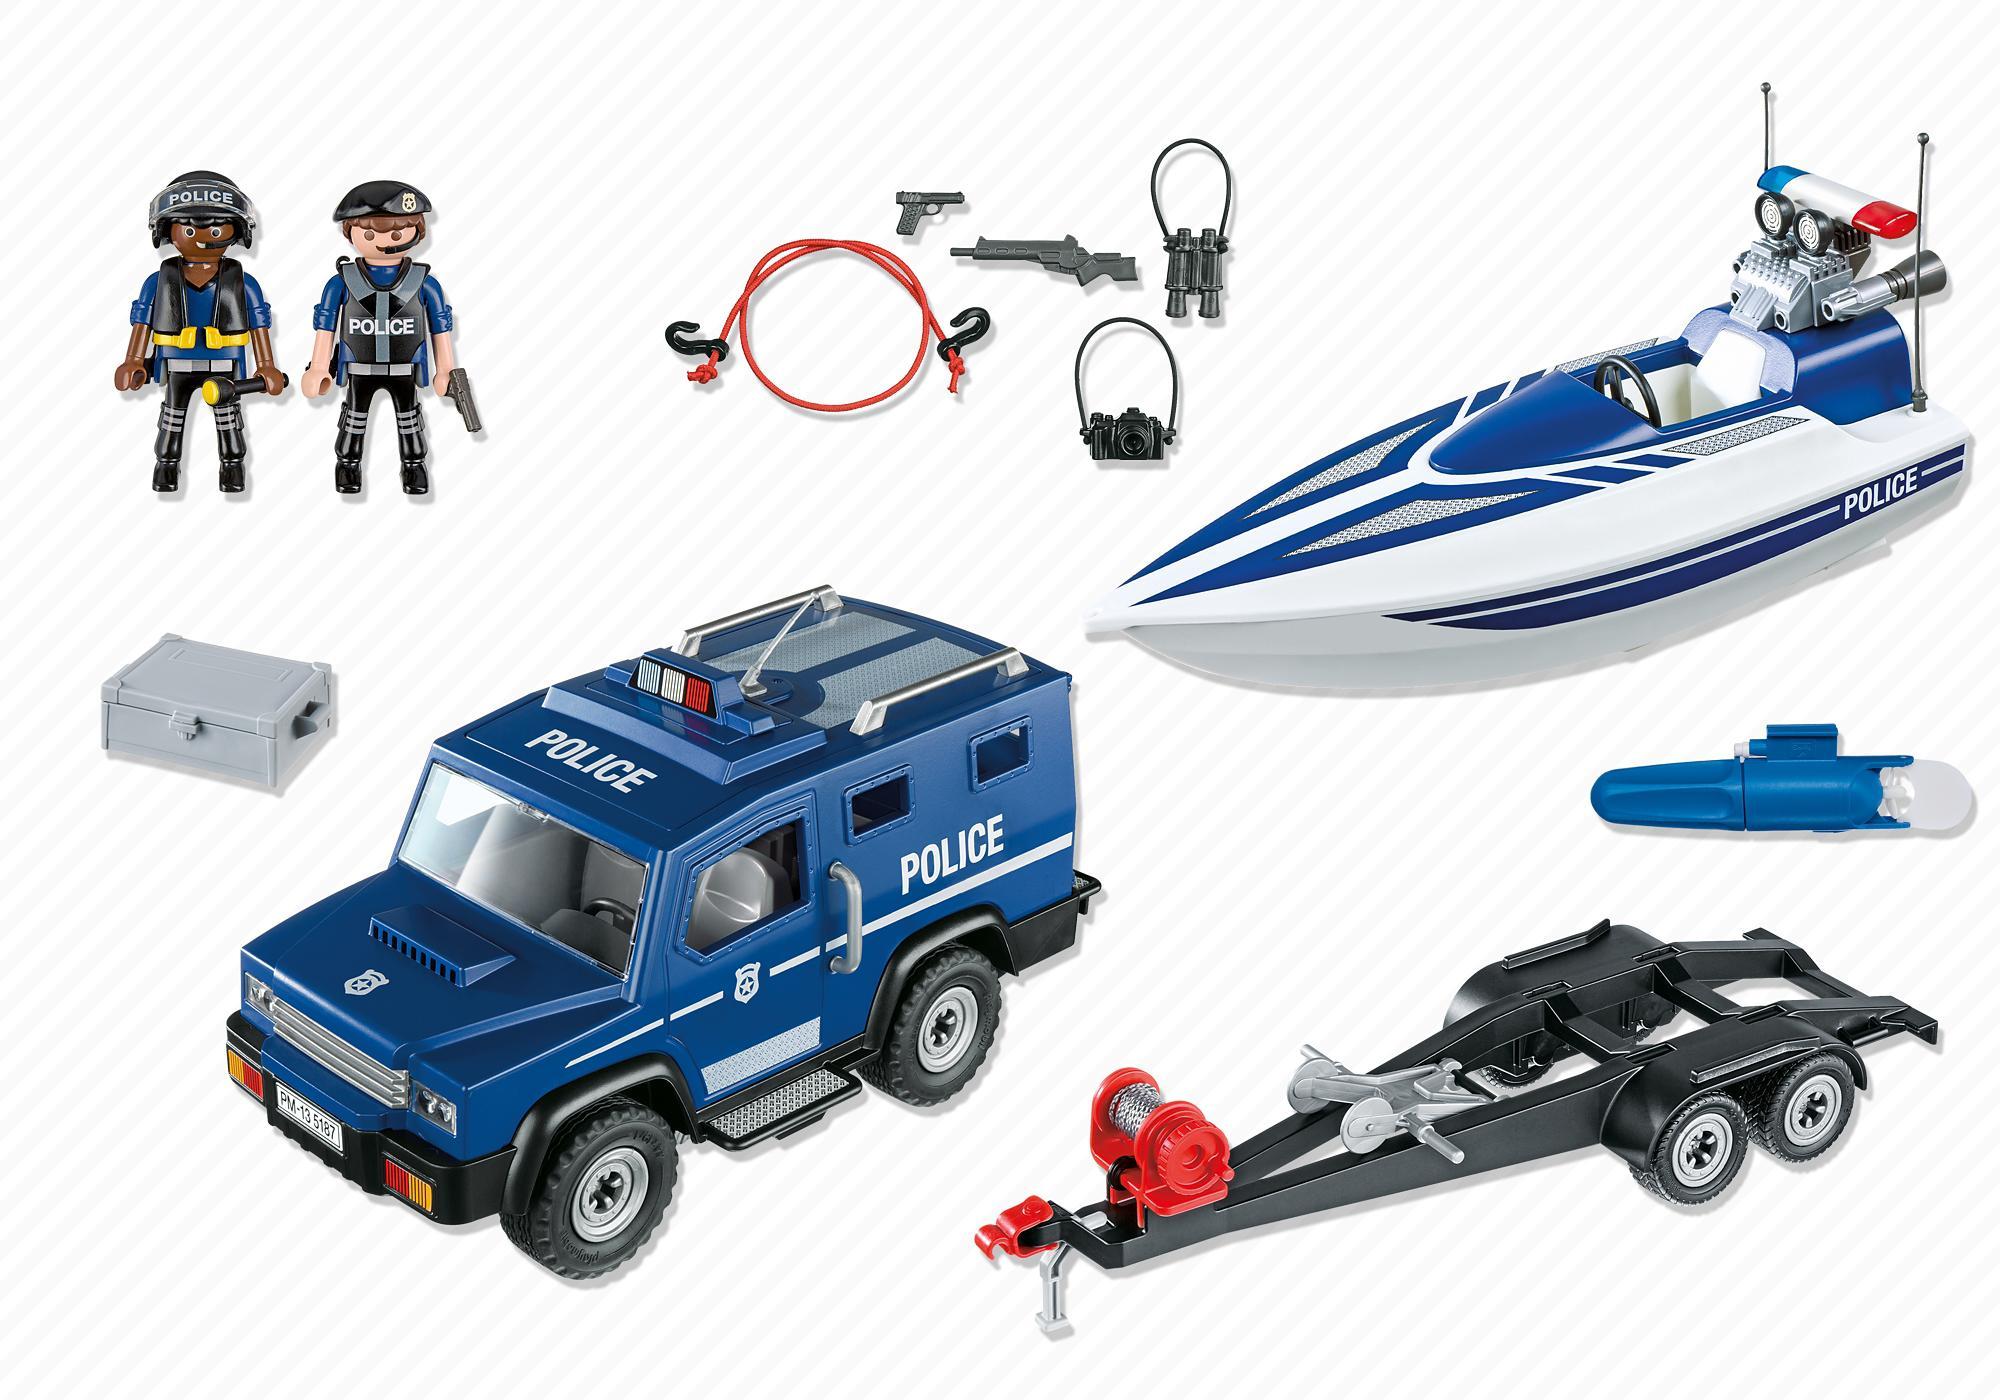 Police Truck with Speedboat - 5187 